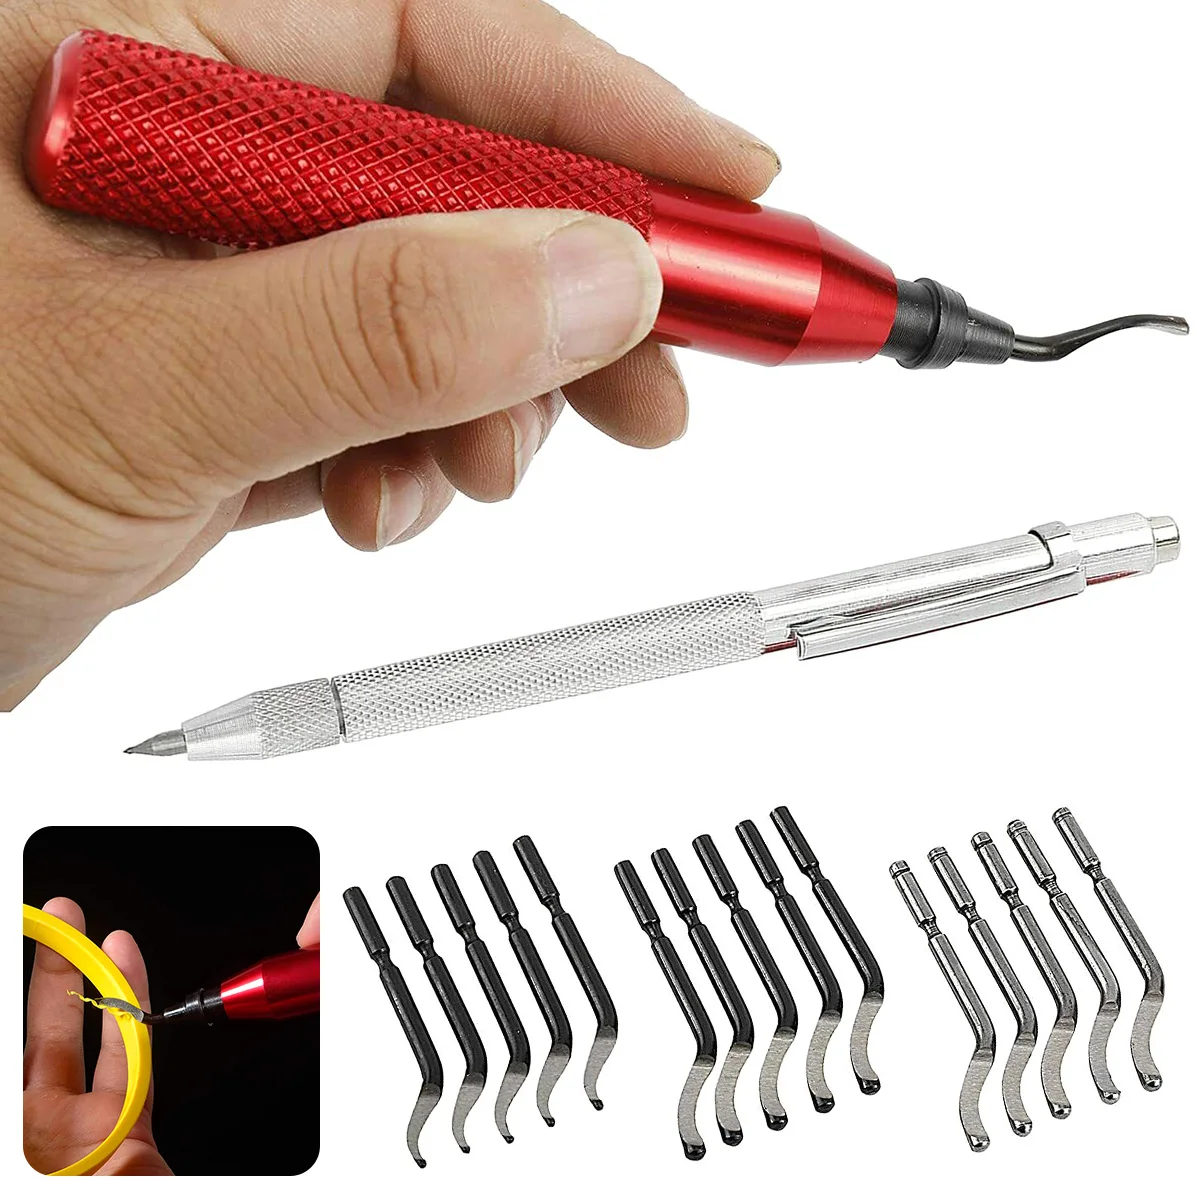 

Deburring Tool Kit Handle Burr Metal Trimming Knife 15pcs Router Bit Rotary Deburr Blades Remover Hand DeburRed for Metal Work